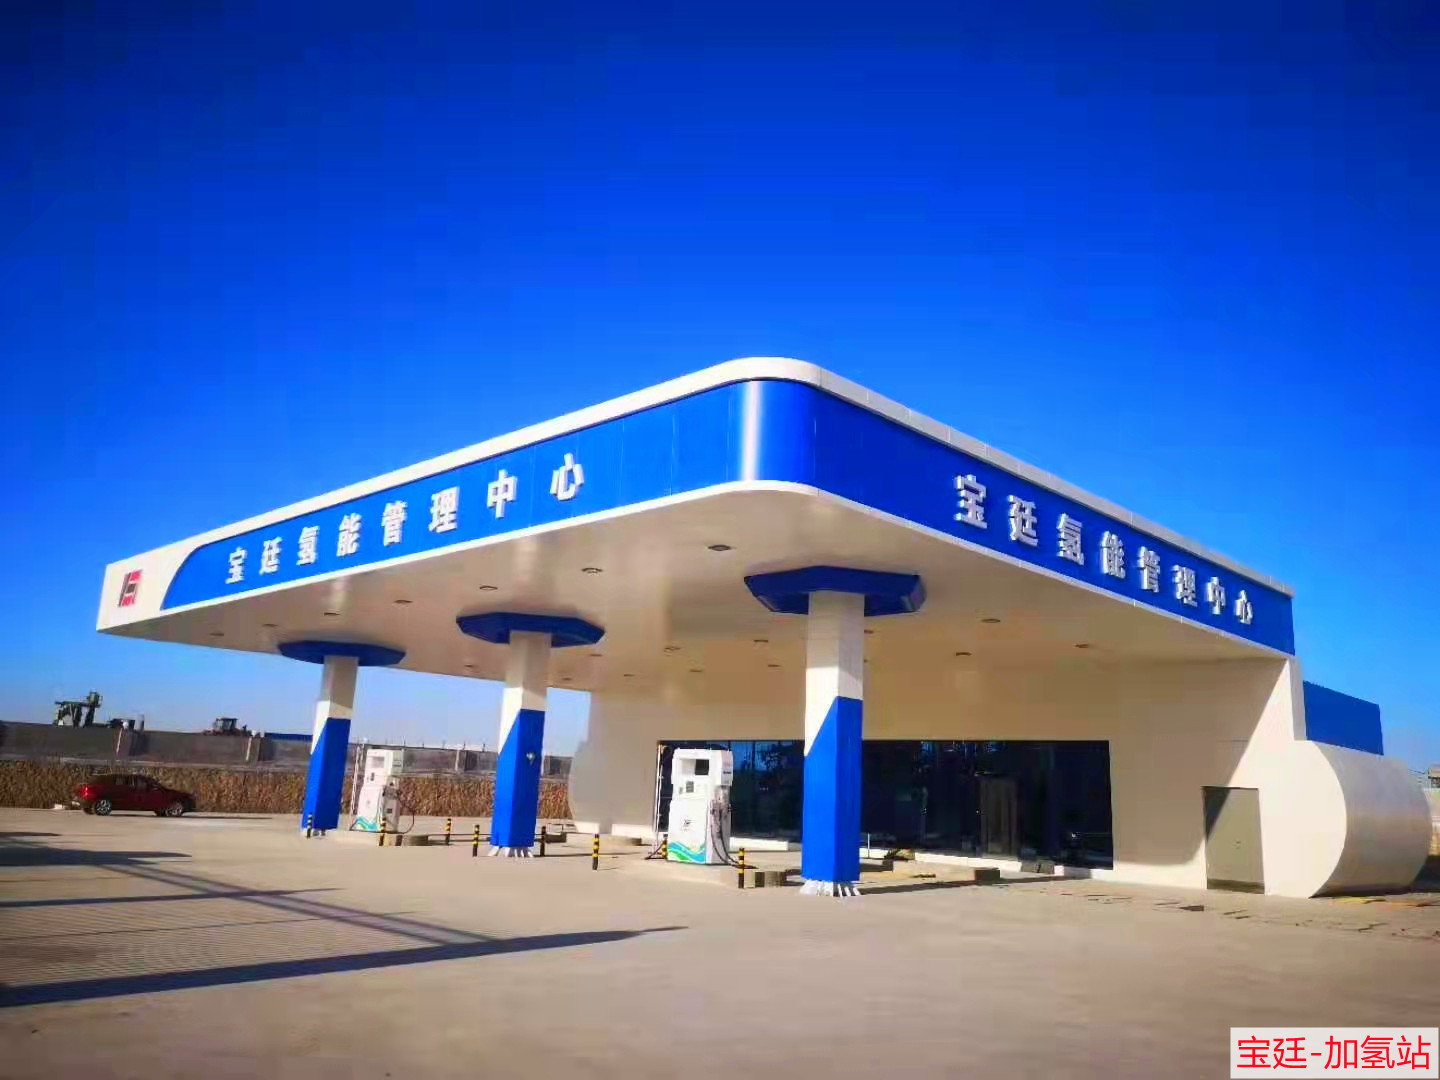 Panorama of Baoting Hydrogen Refueling Station